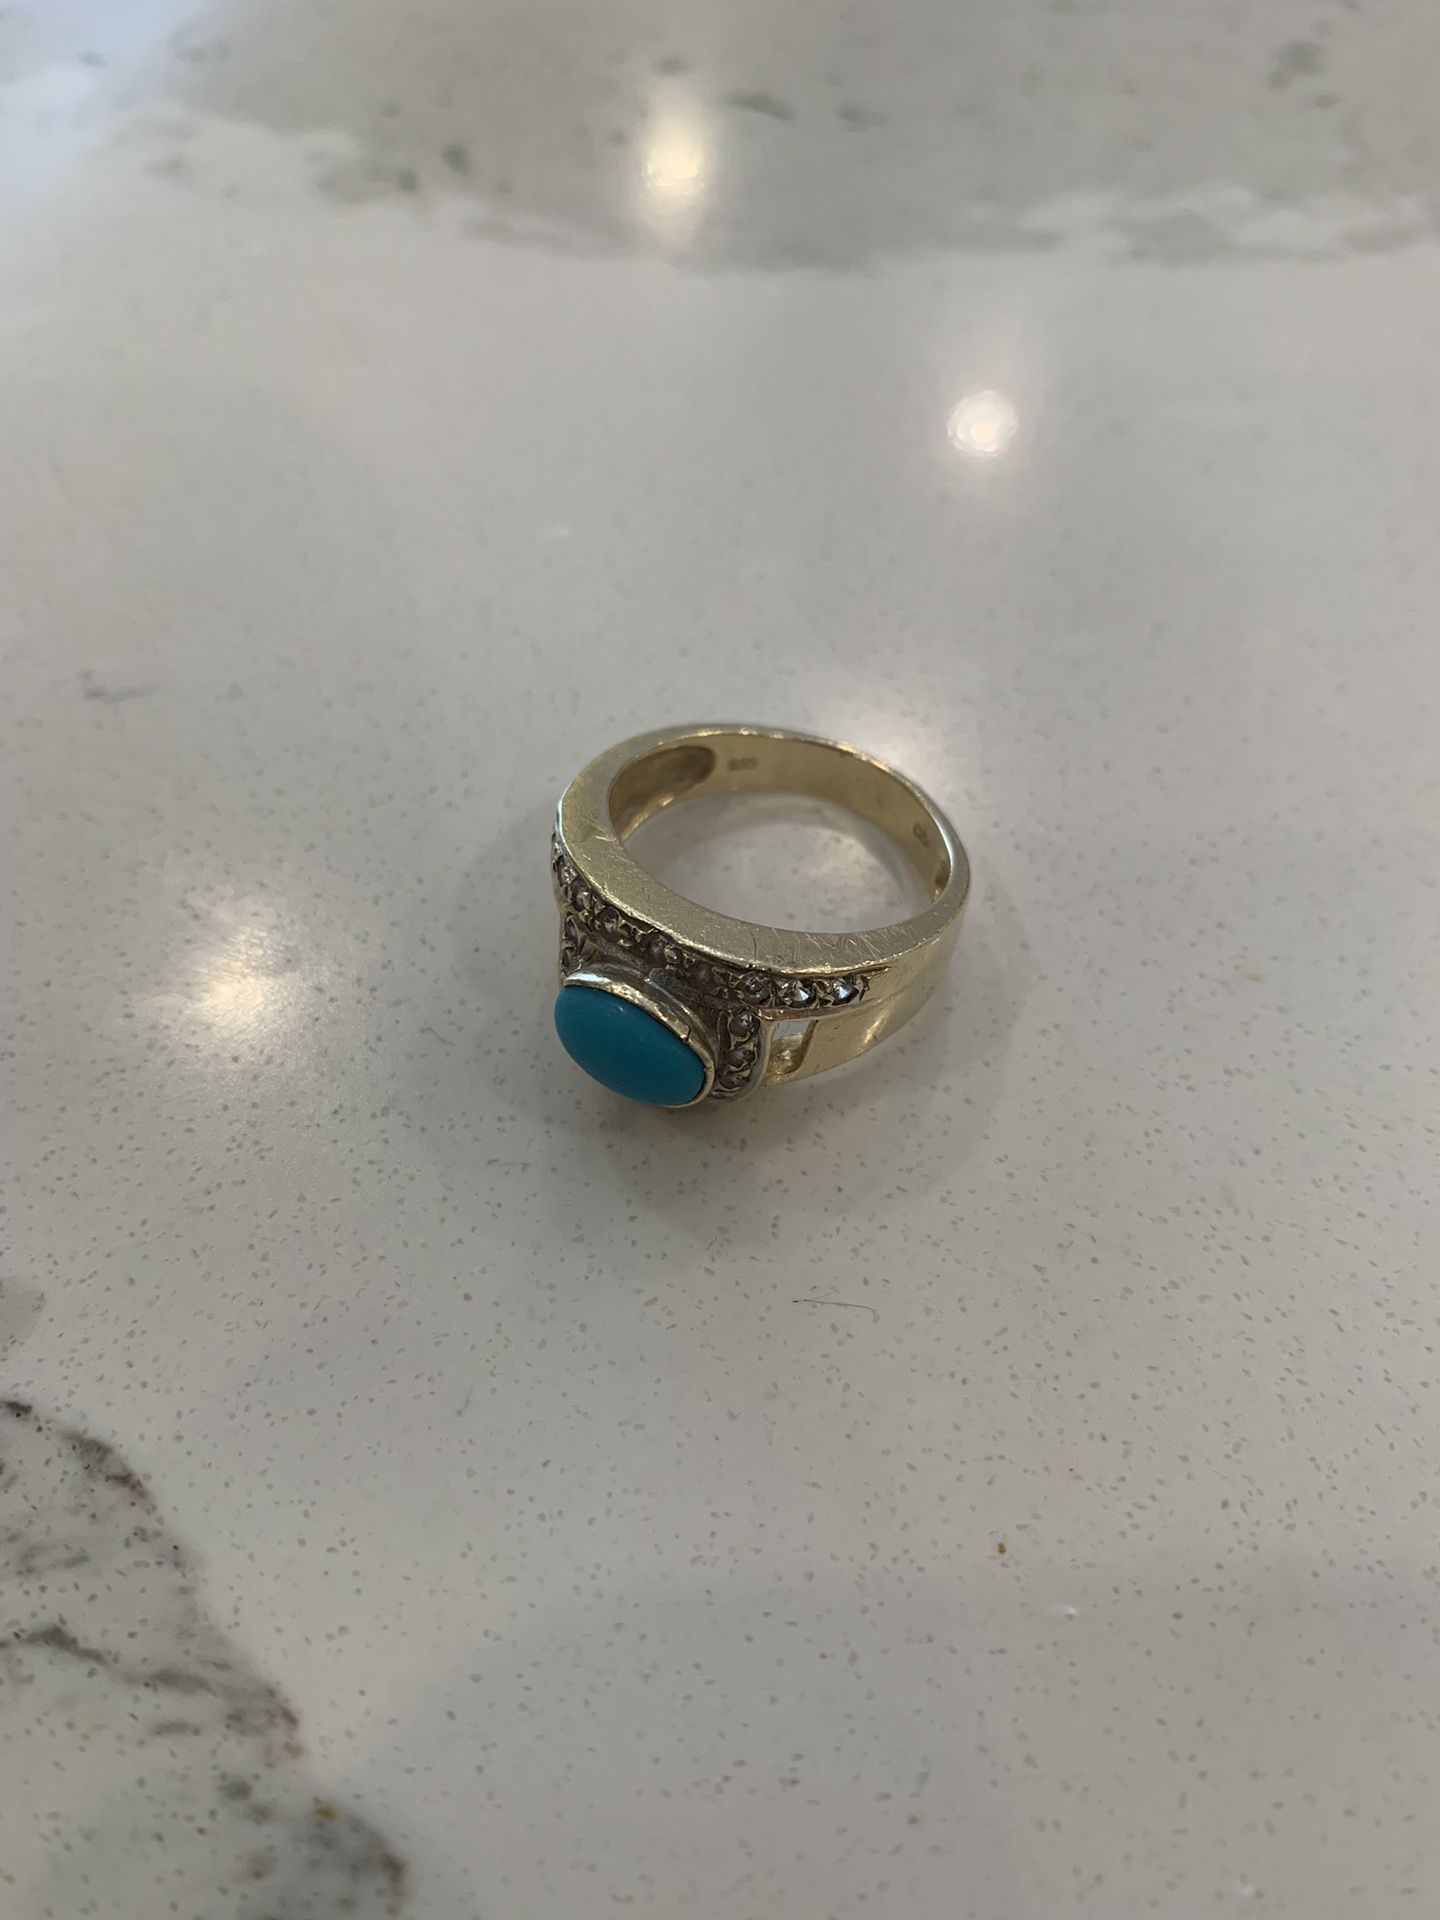 14k (585) solid Gold Ring with a stone